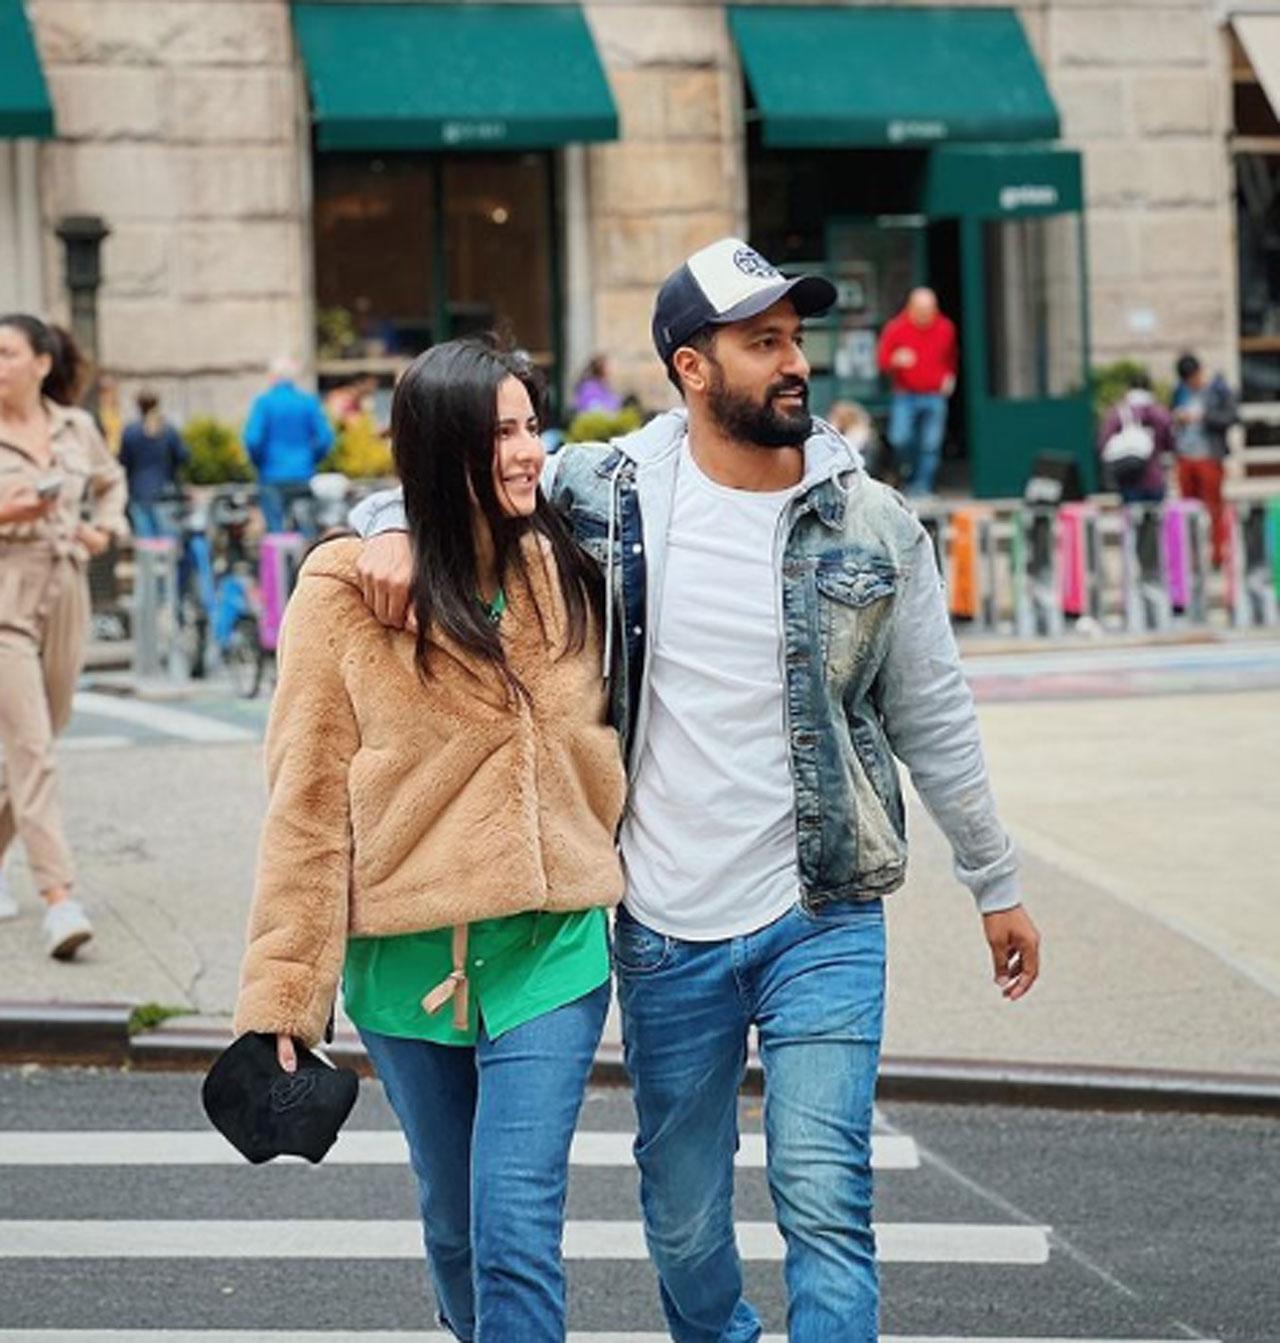 Vicky and Katrina were clicked in New York and were all smiles as they walked together on the busy road of the city. Kaushal was clearly having 'Sugar Rush' as he puts the caption.